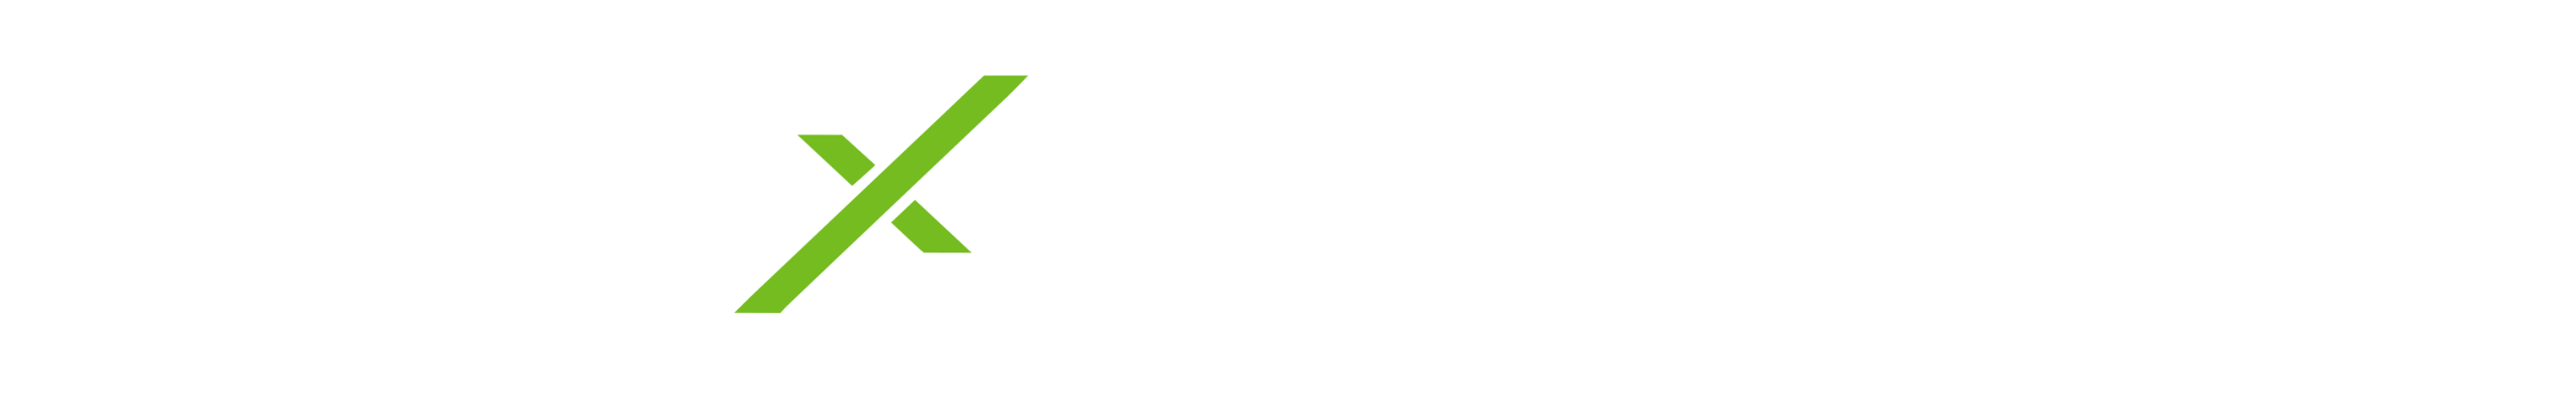 KickX Giftcards